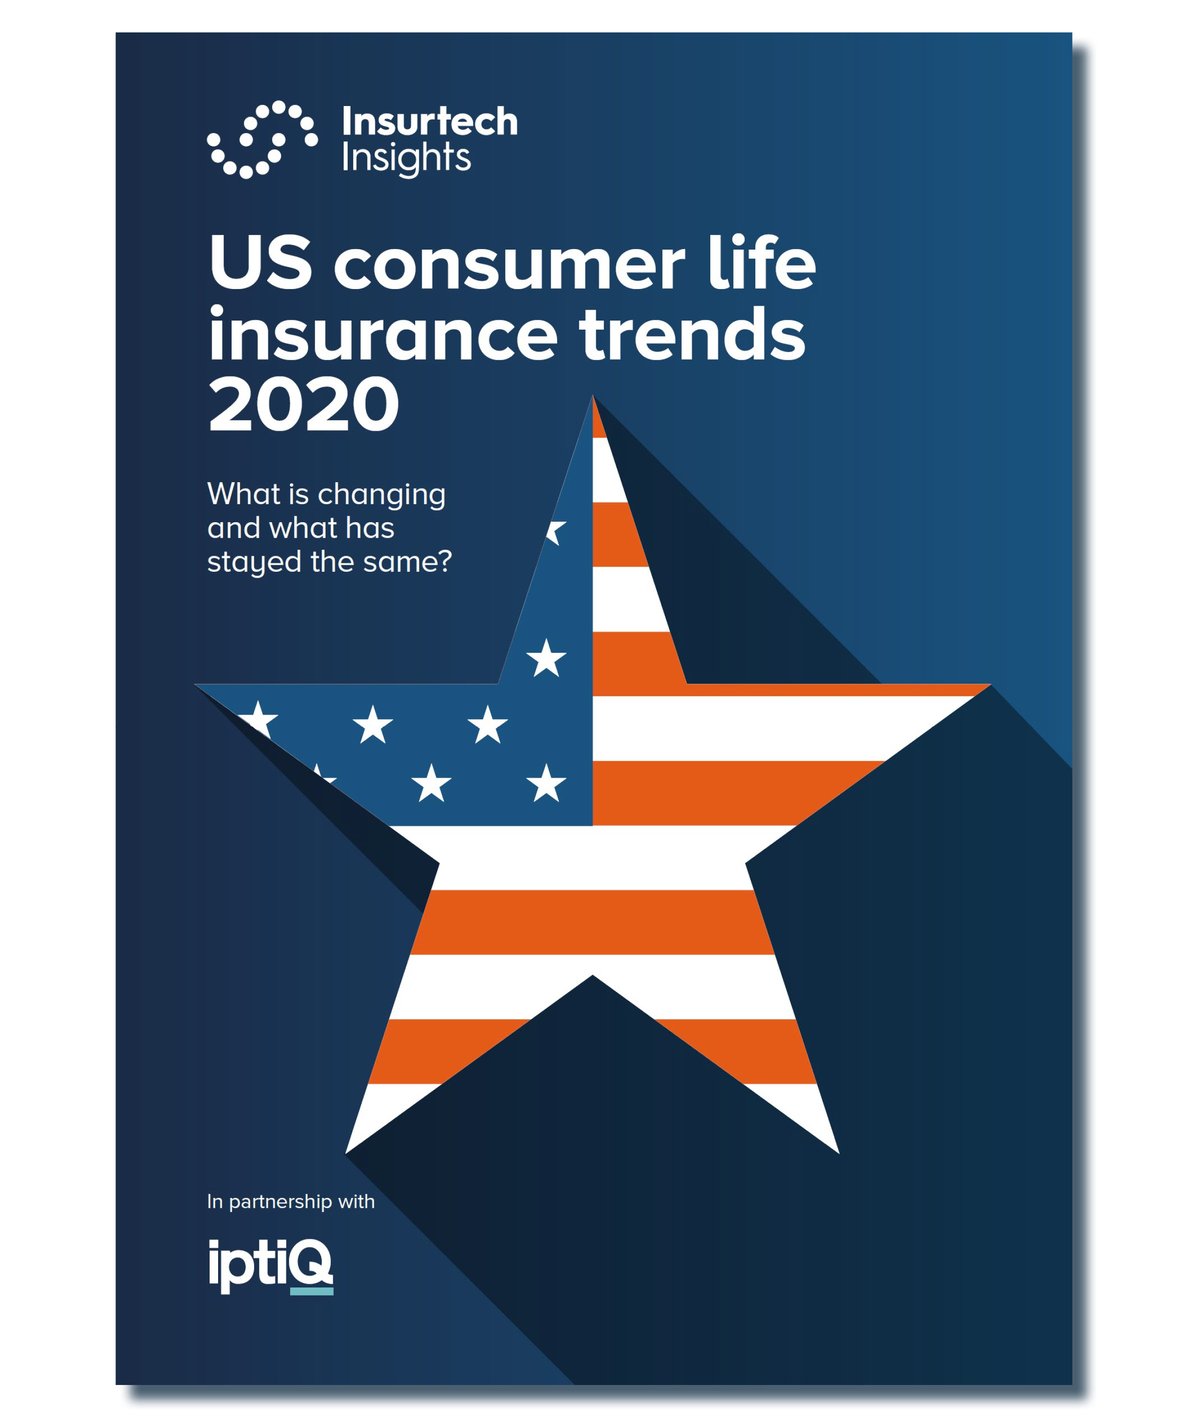 Download the Insurtech Insights report